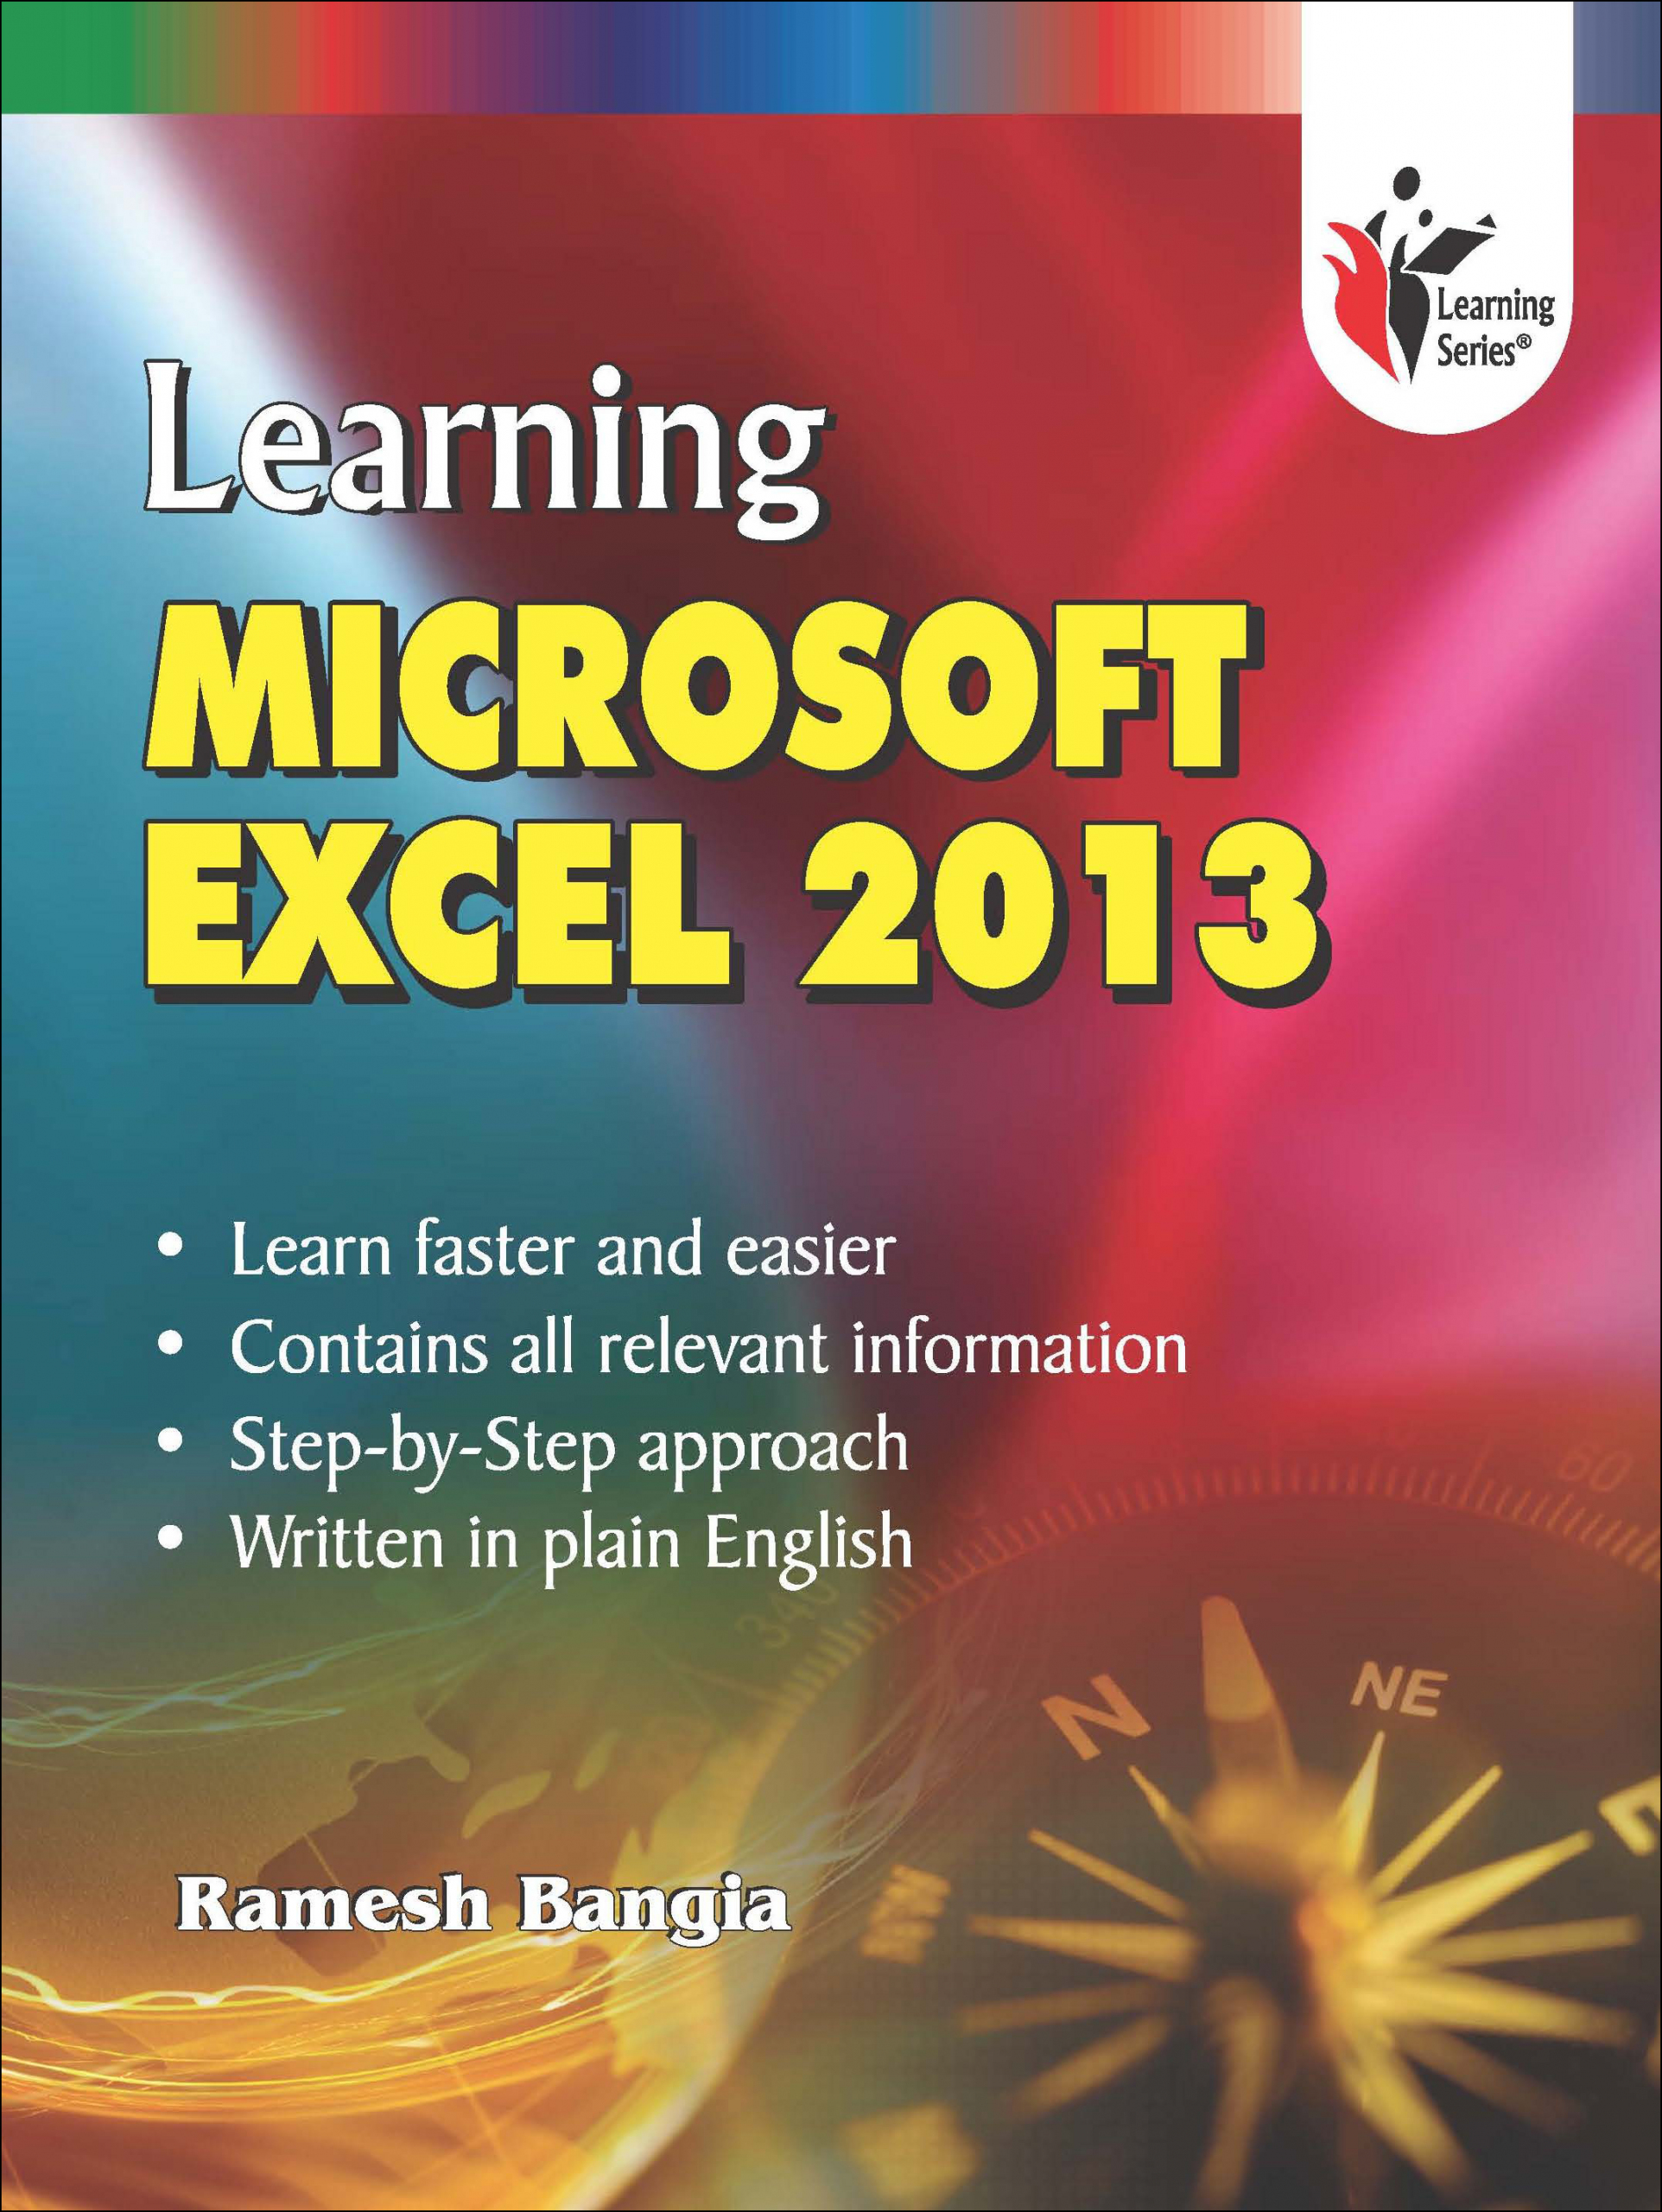 Learning Microsoft Excel 2013